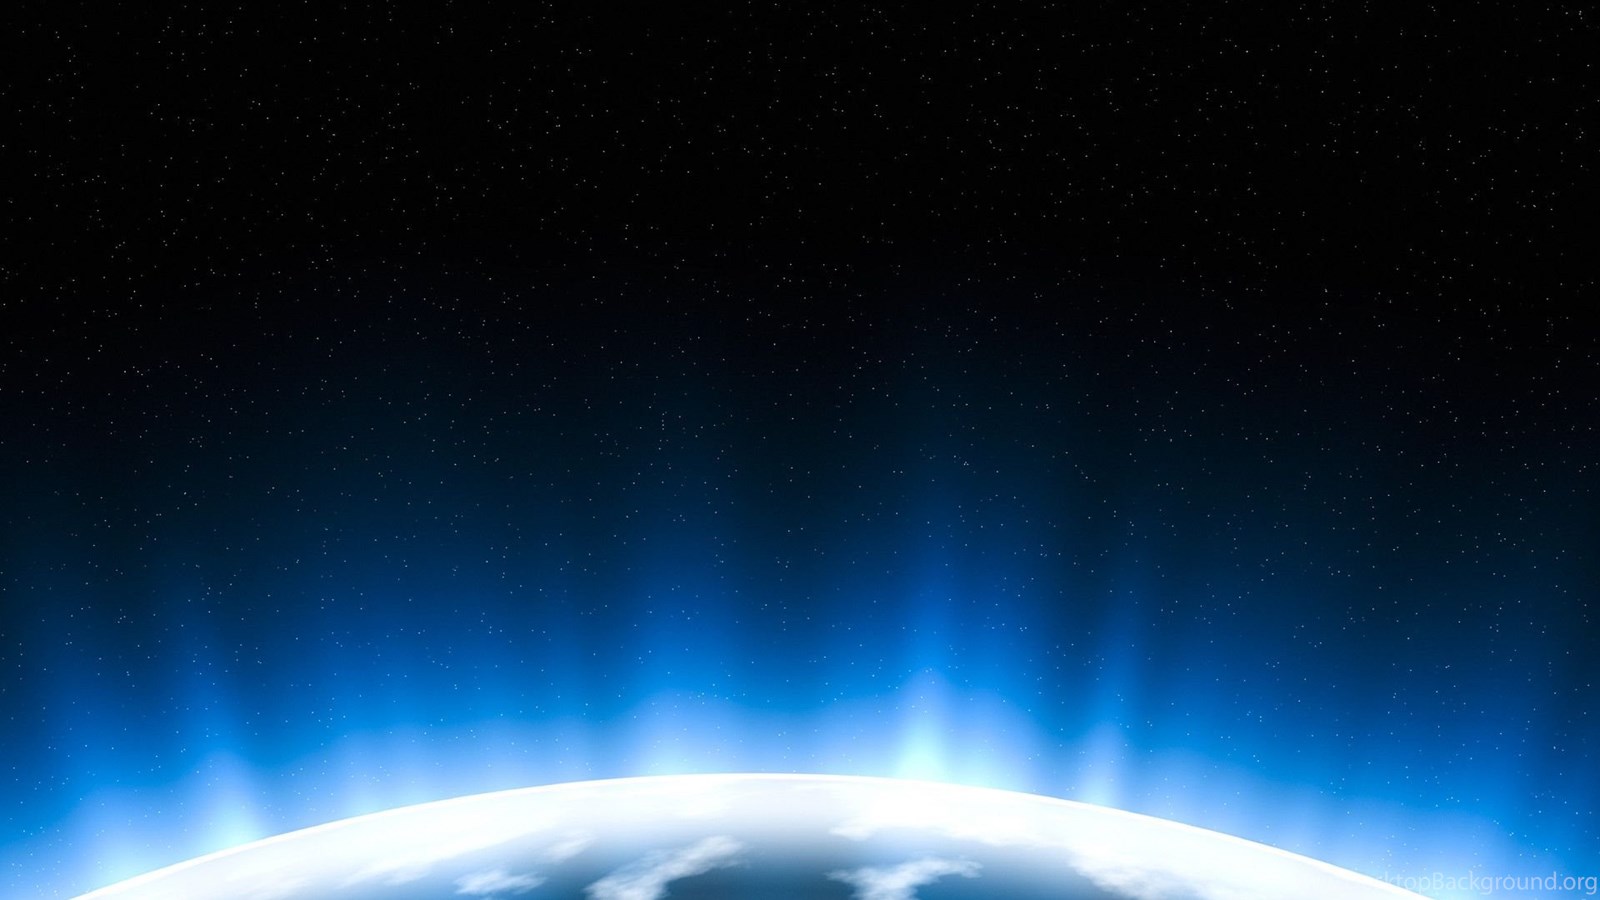 Hd wallpaperpace neon earth puter background 1920x1200 Desktop Background